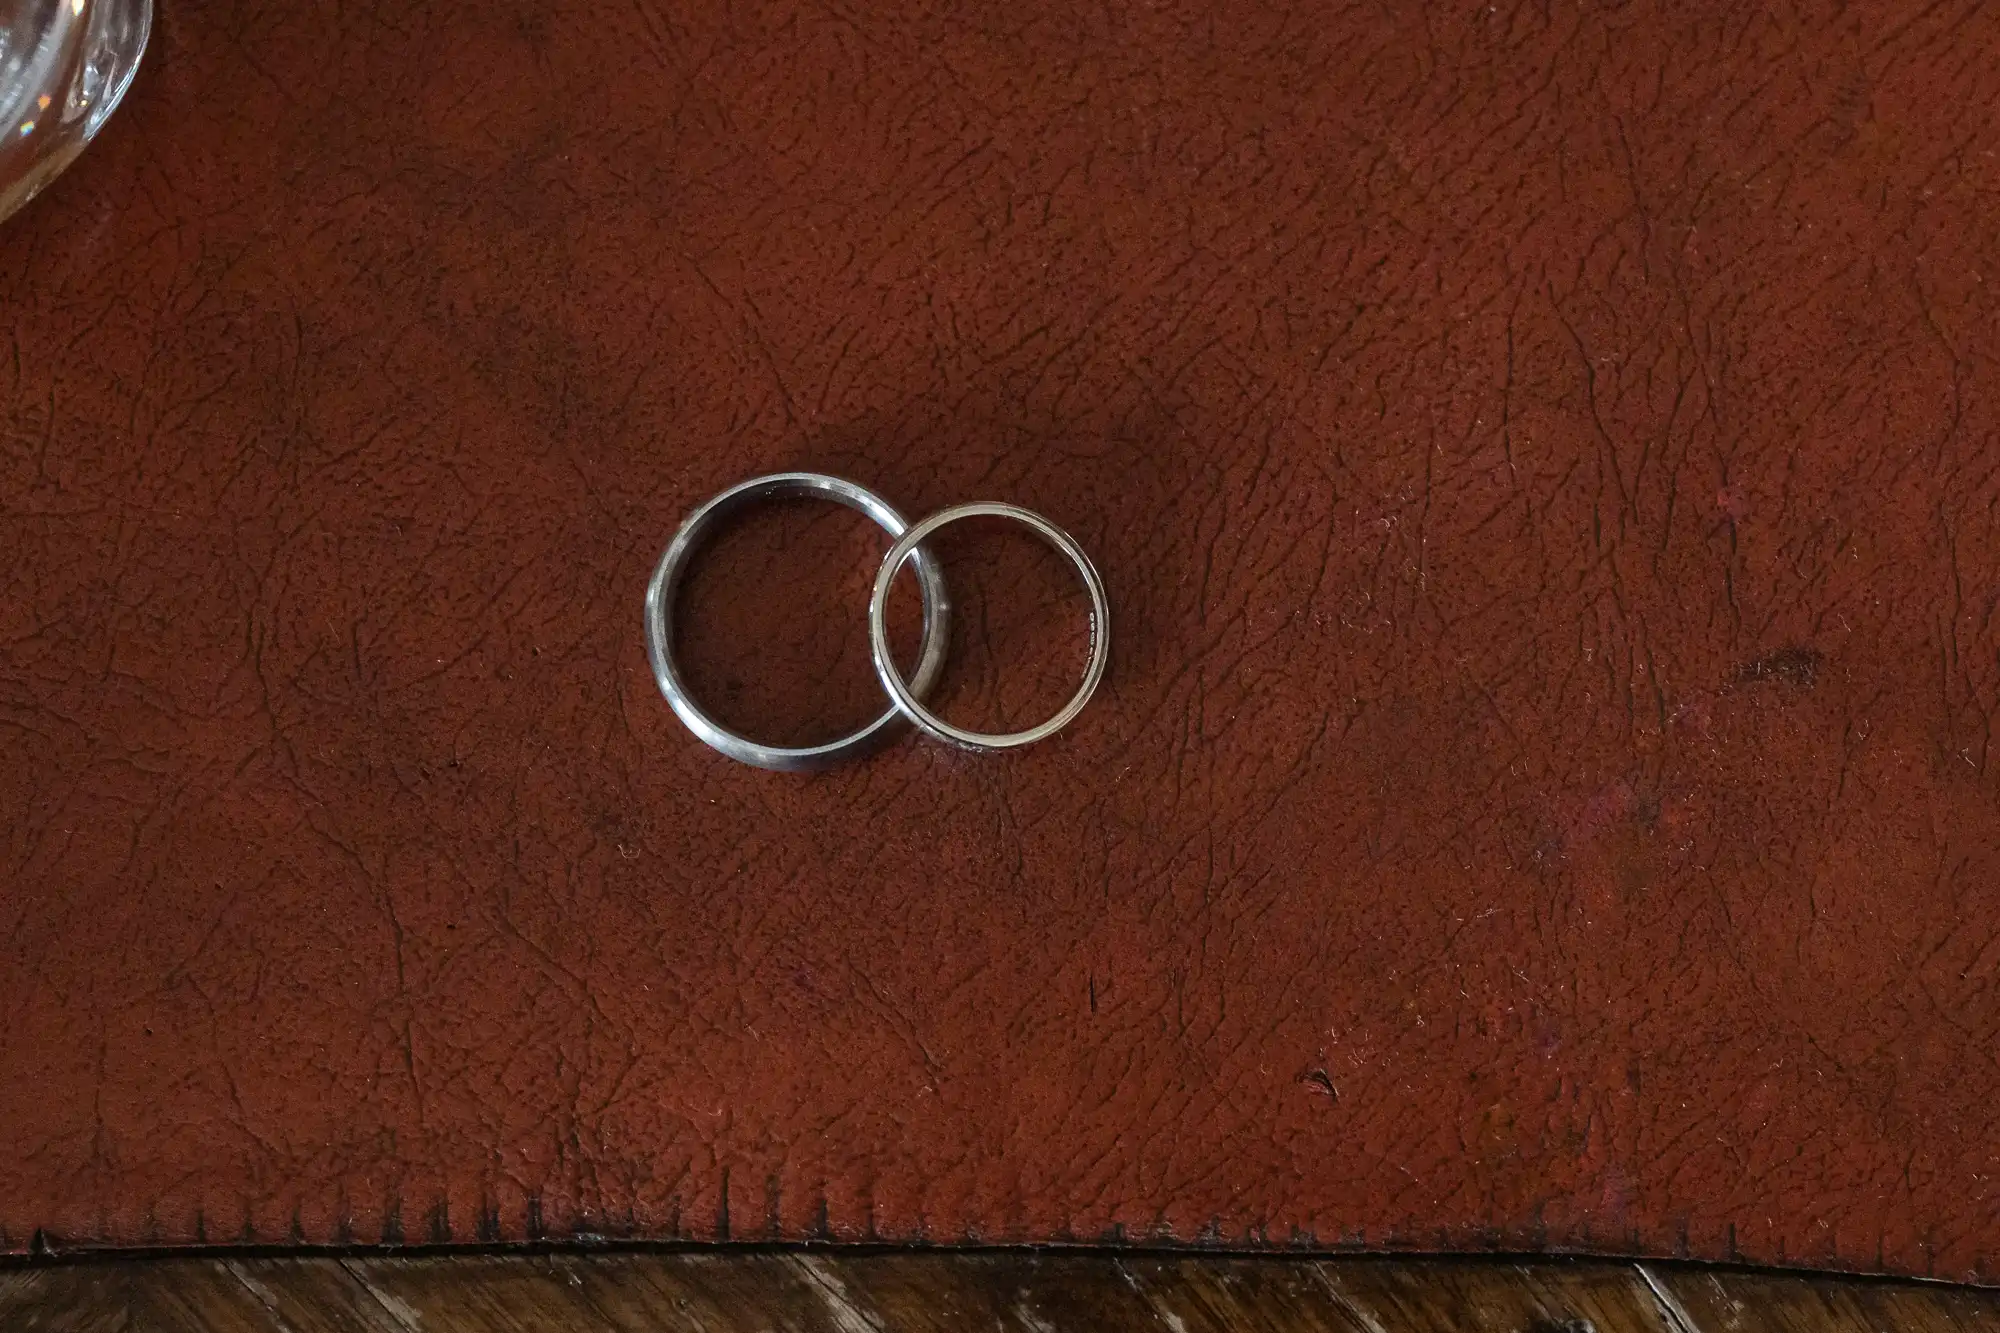 Two wedding rings lie closely together on a textured, reddish-brown leather surface.